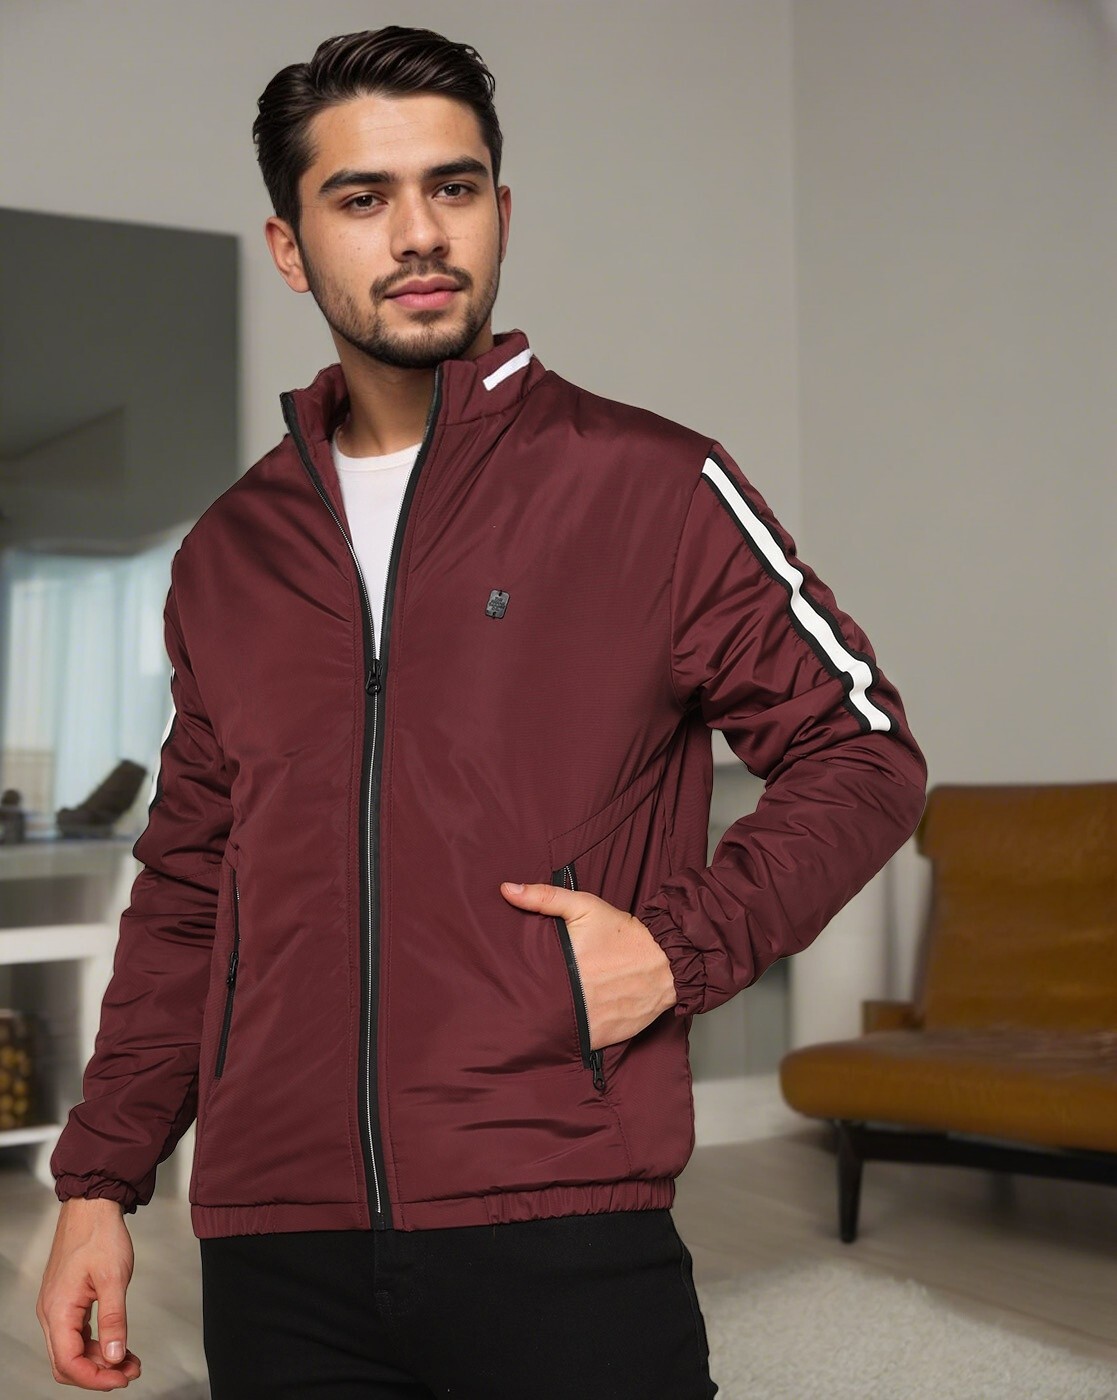 Buy Full Sleeve Solid Men Quilted Jacket Maroon Polyester for Best Price,  Reviews, Free Shipping